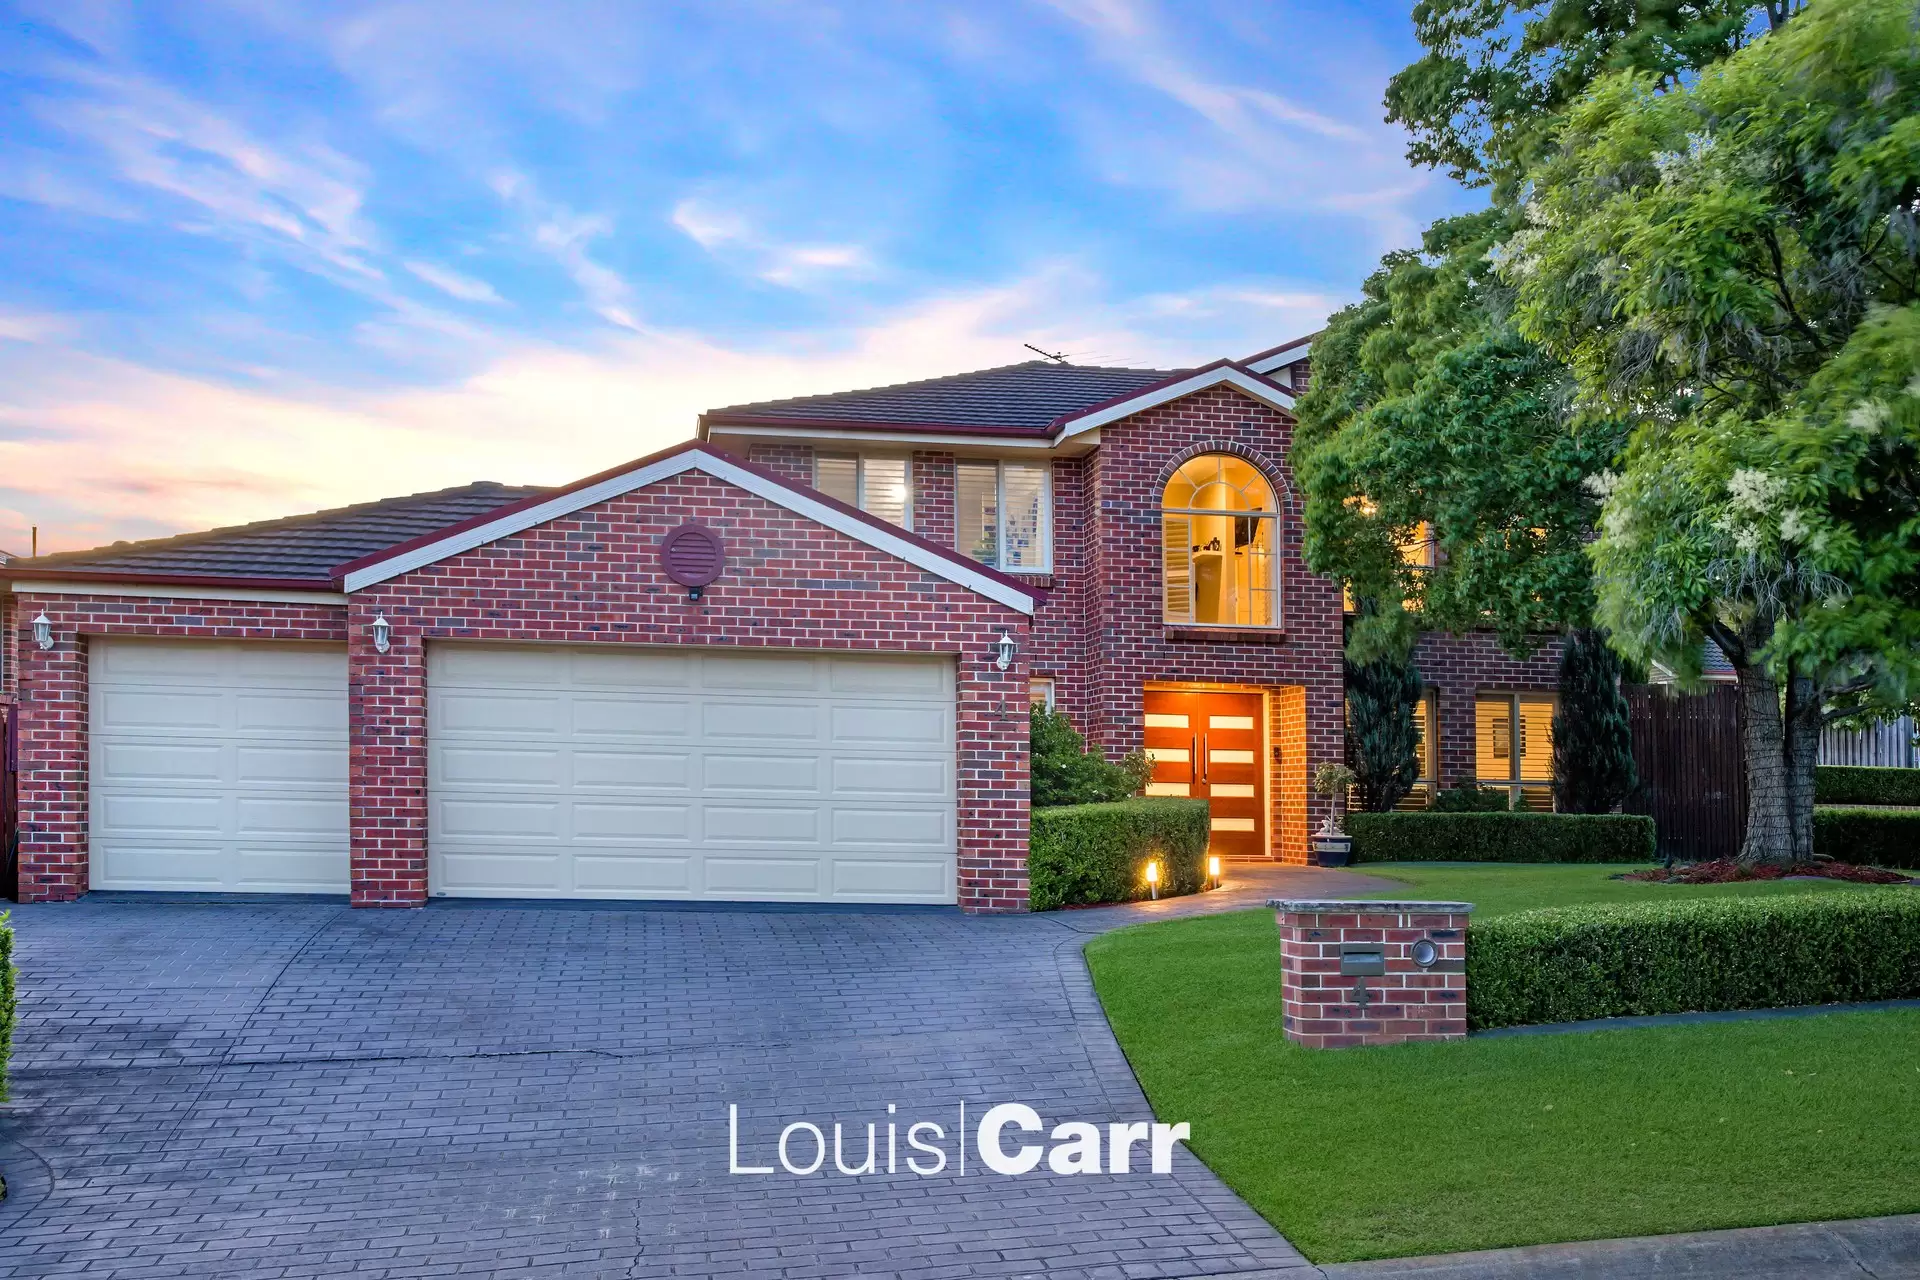 Photo #1: 4 Rooke Court, Kellyville - Sold by Louis Carr Real Estate